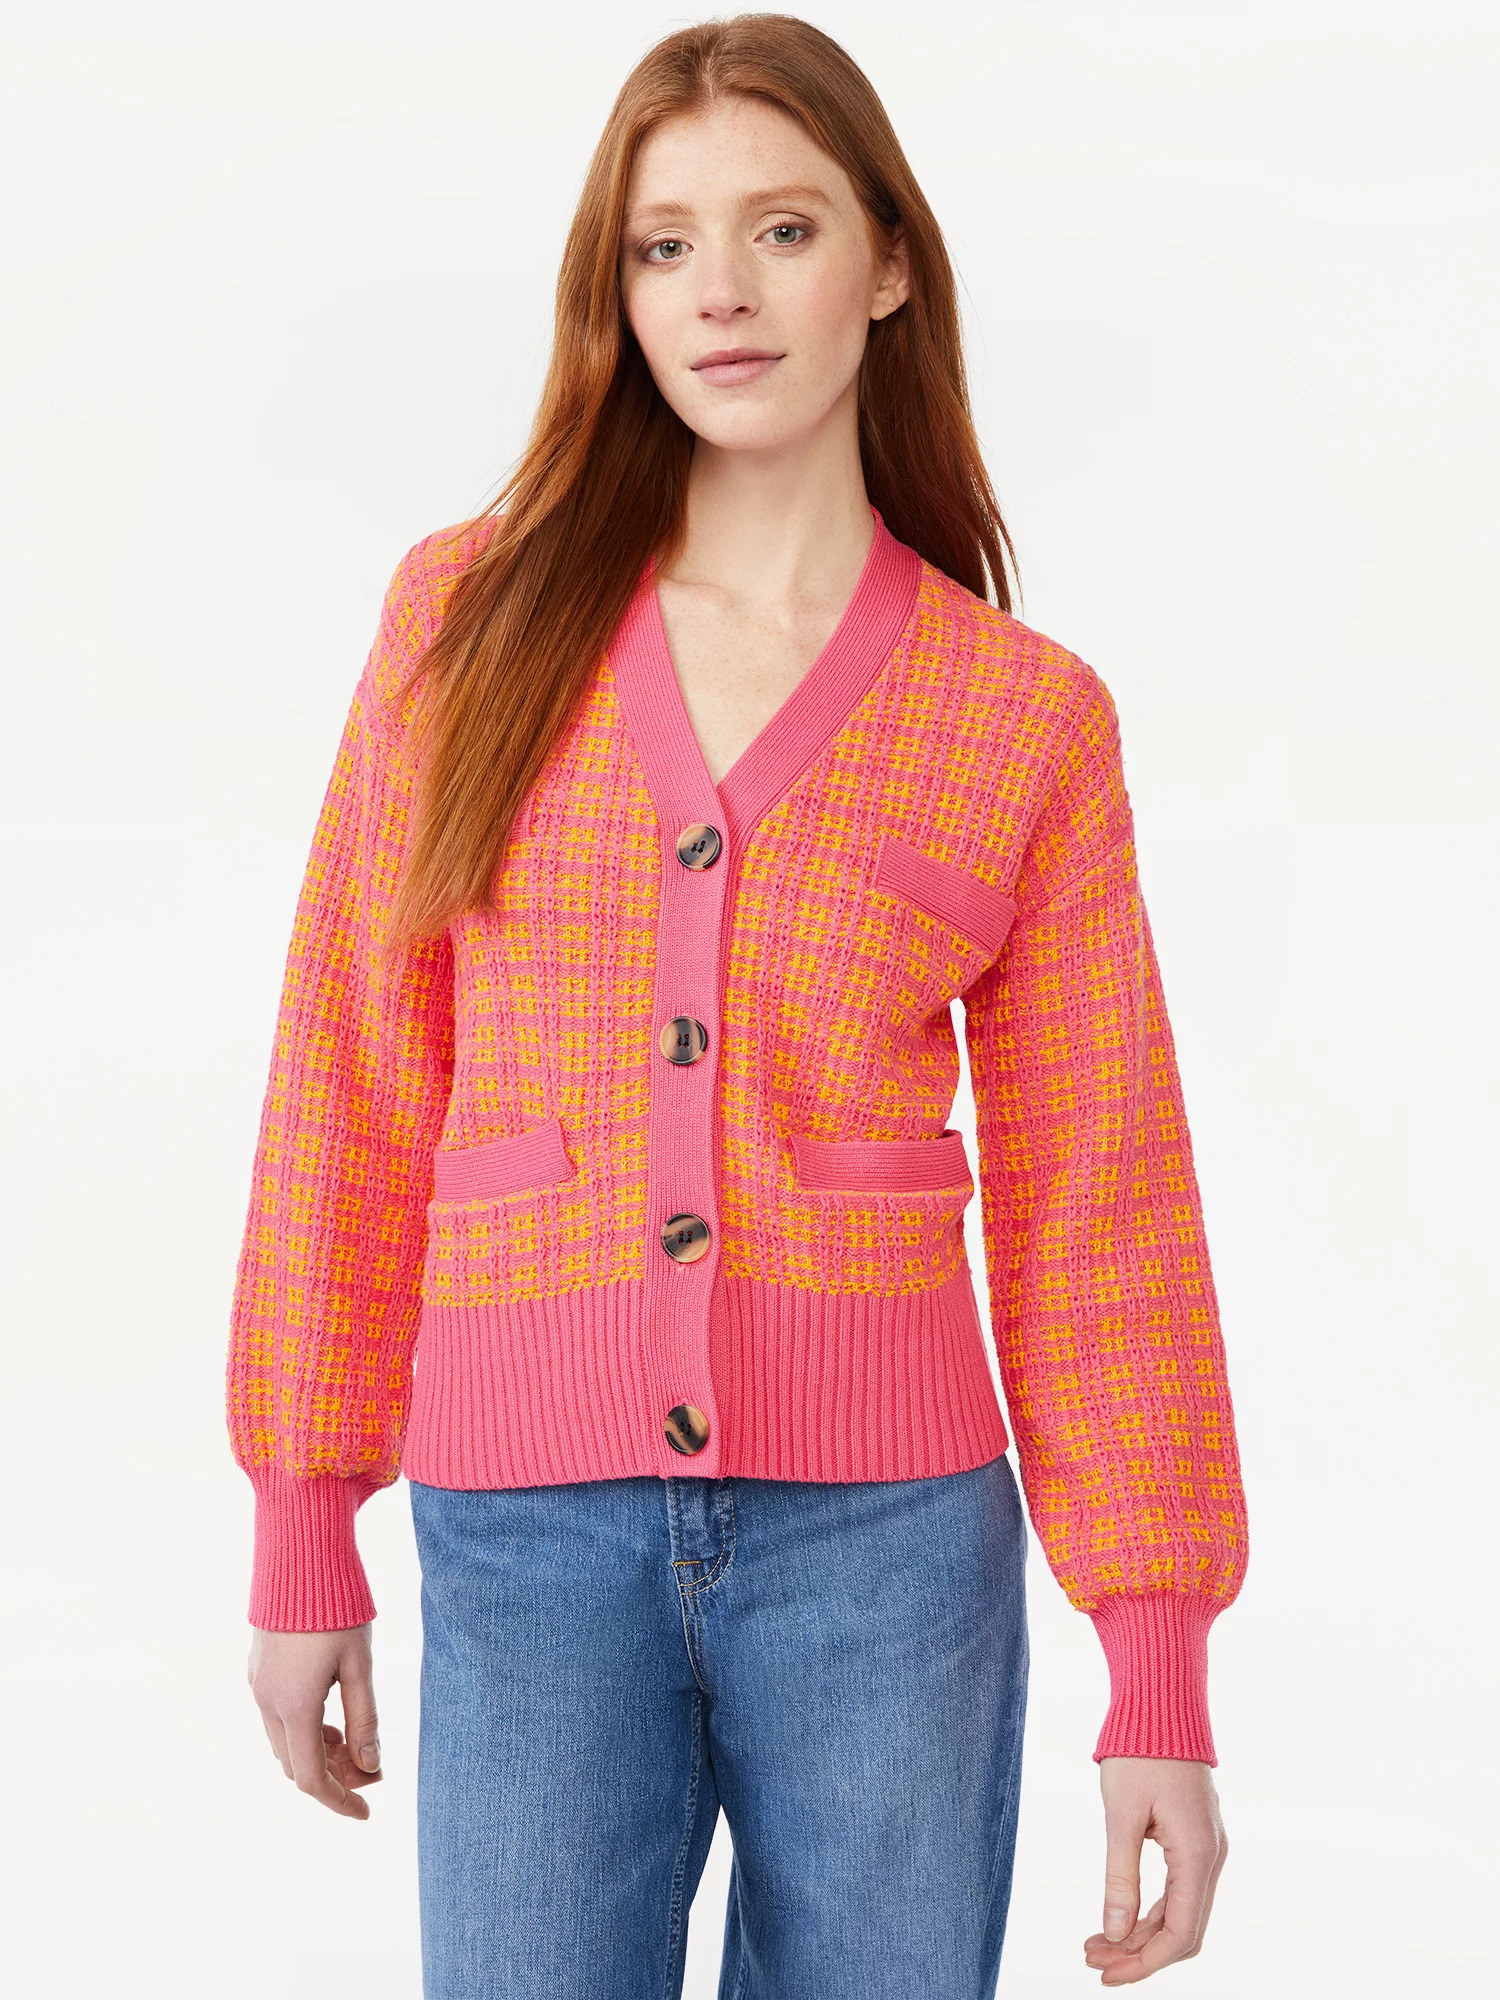 Model wearing the hot pink cardigan